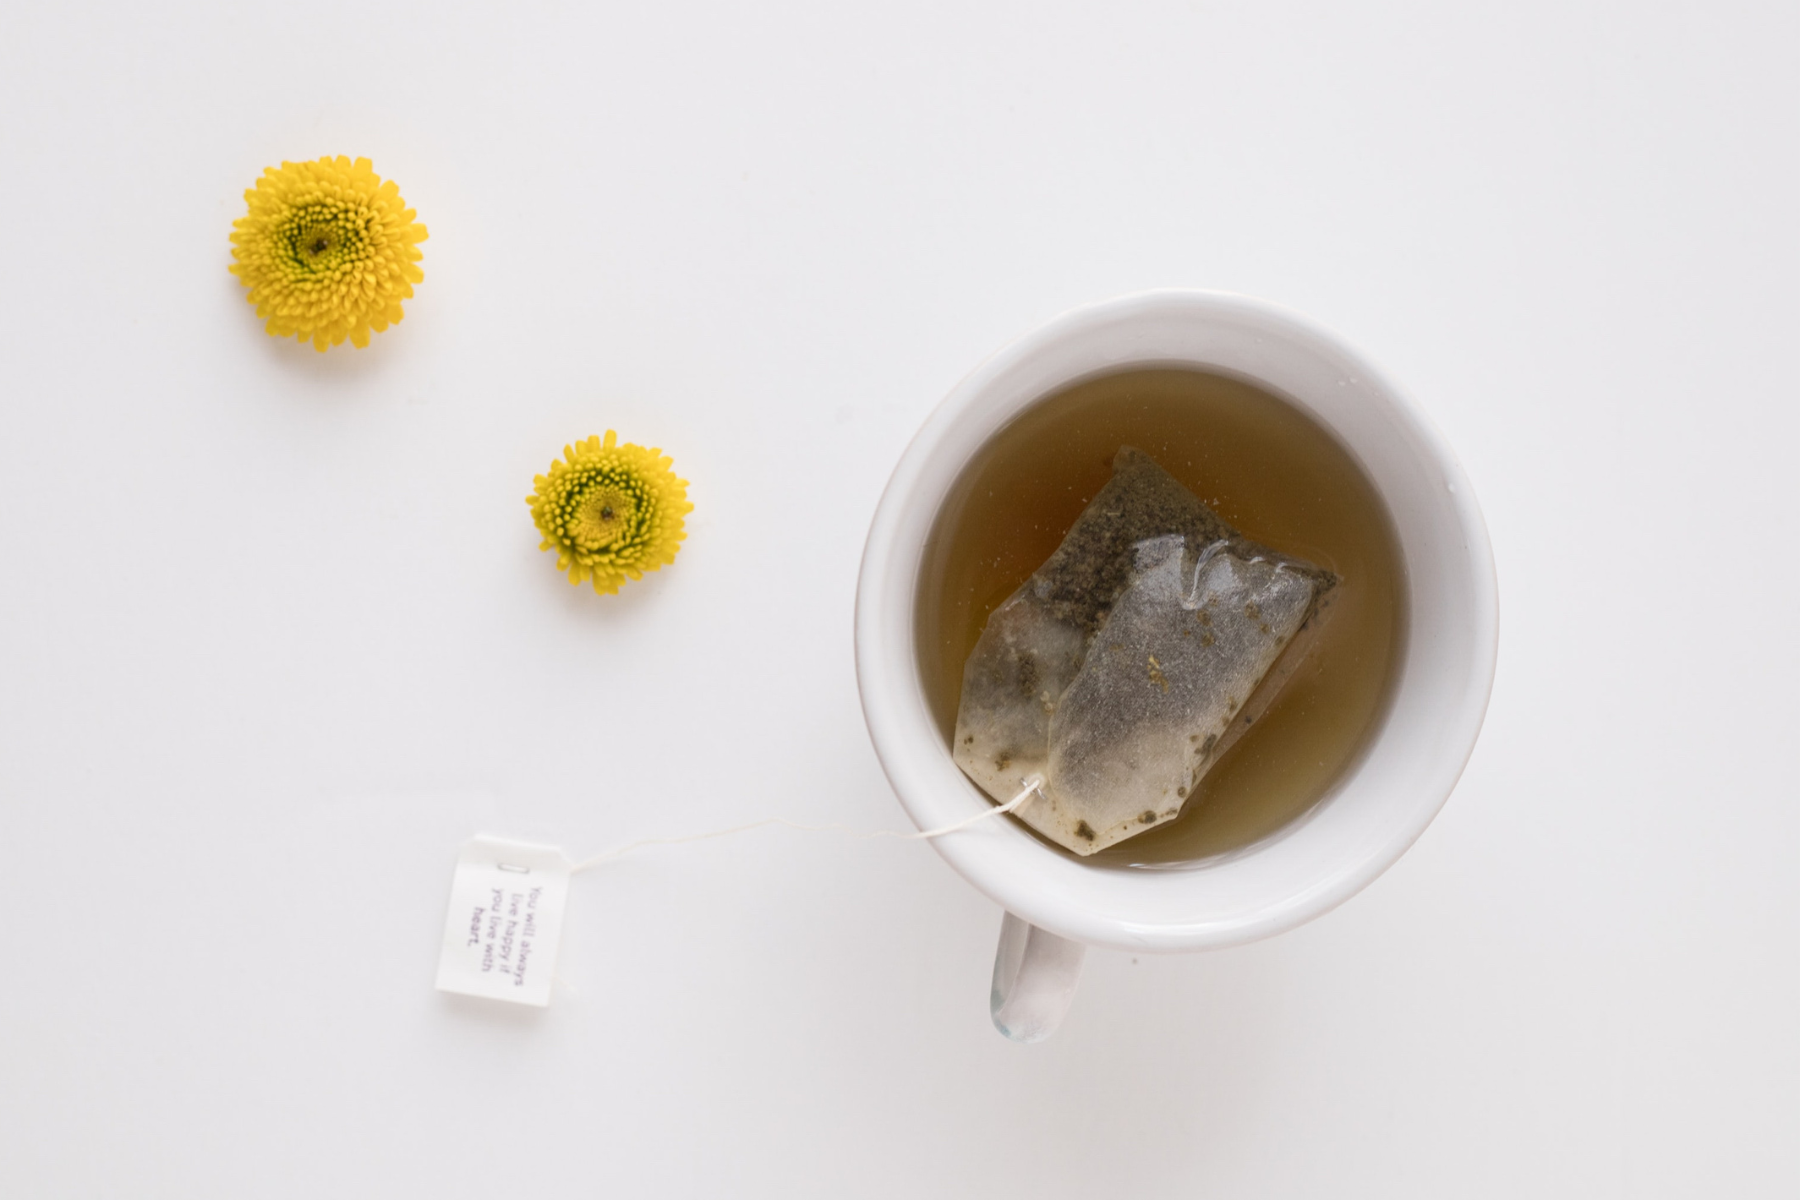 Are herbal teas good for the menopause?